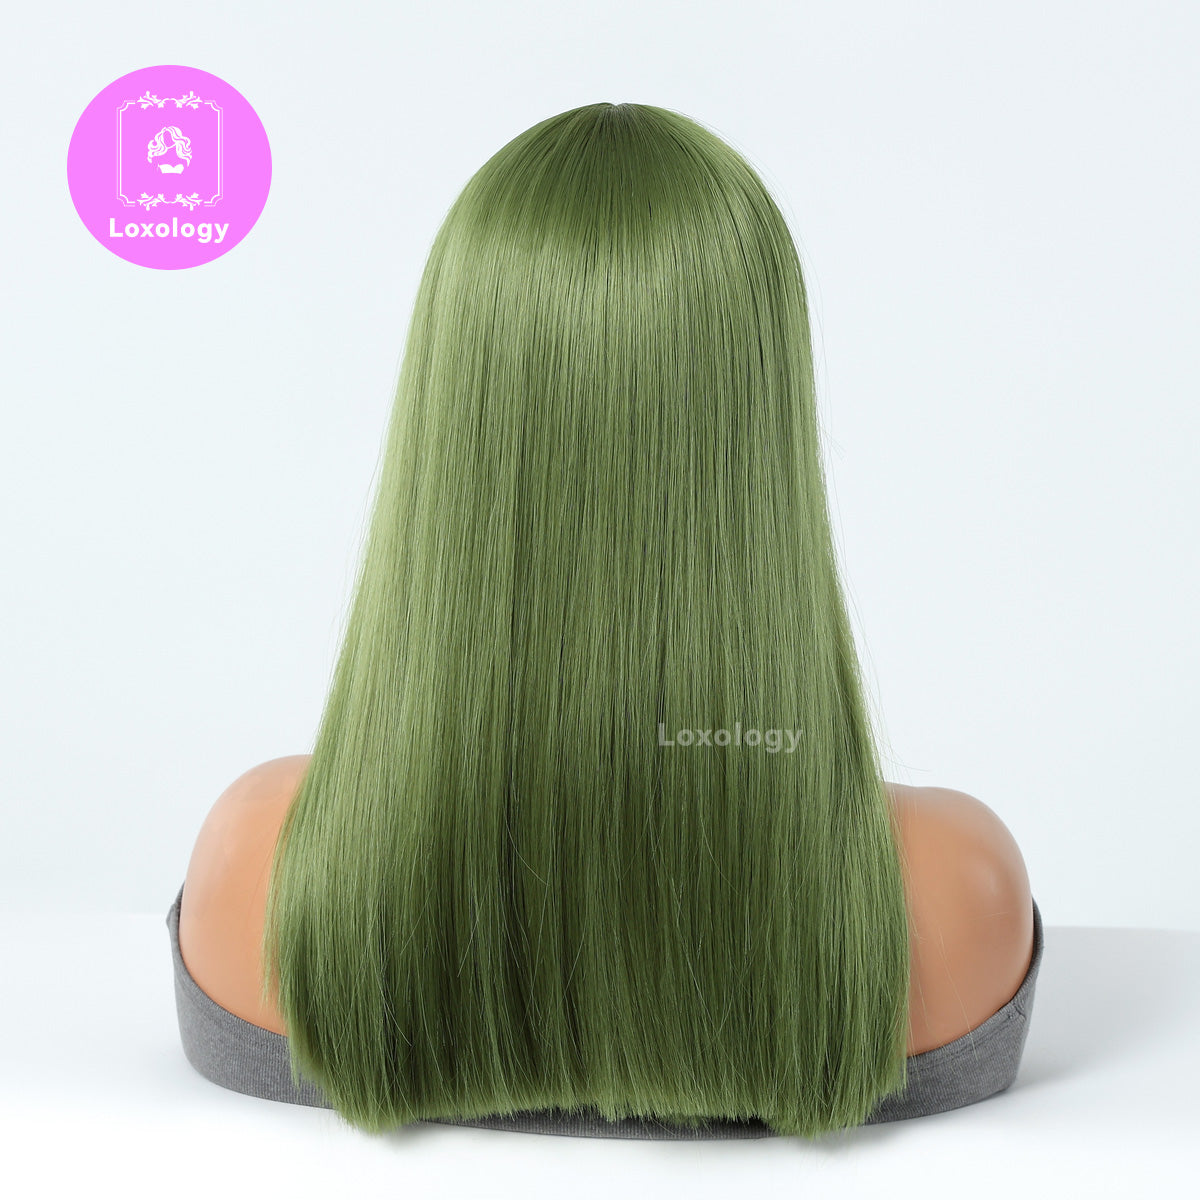 【Poppy】Loxology | Long straight green wigs with bangs wigs for women for daily party